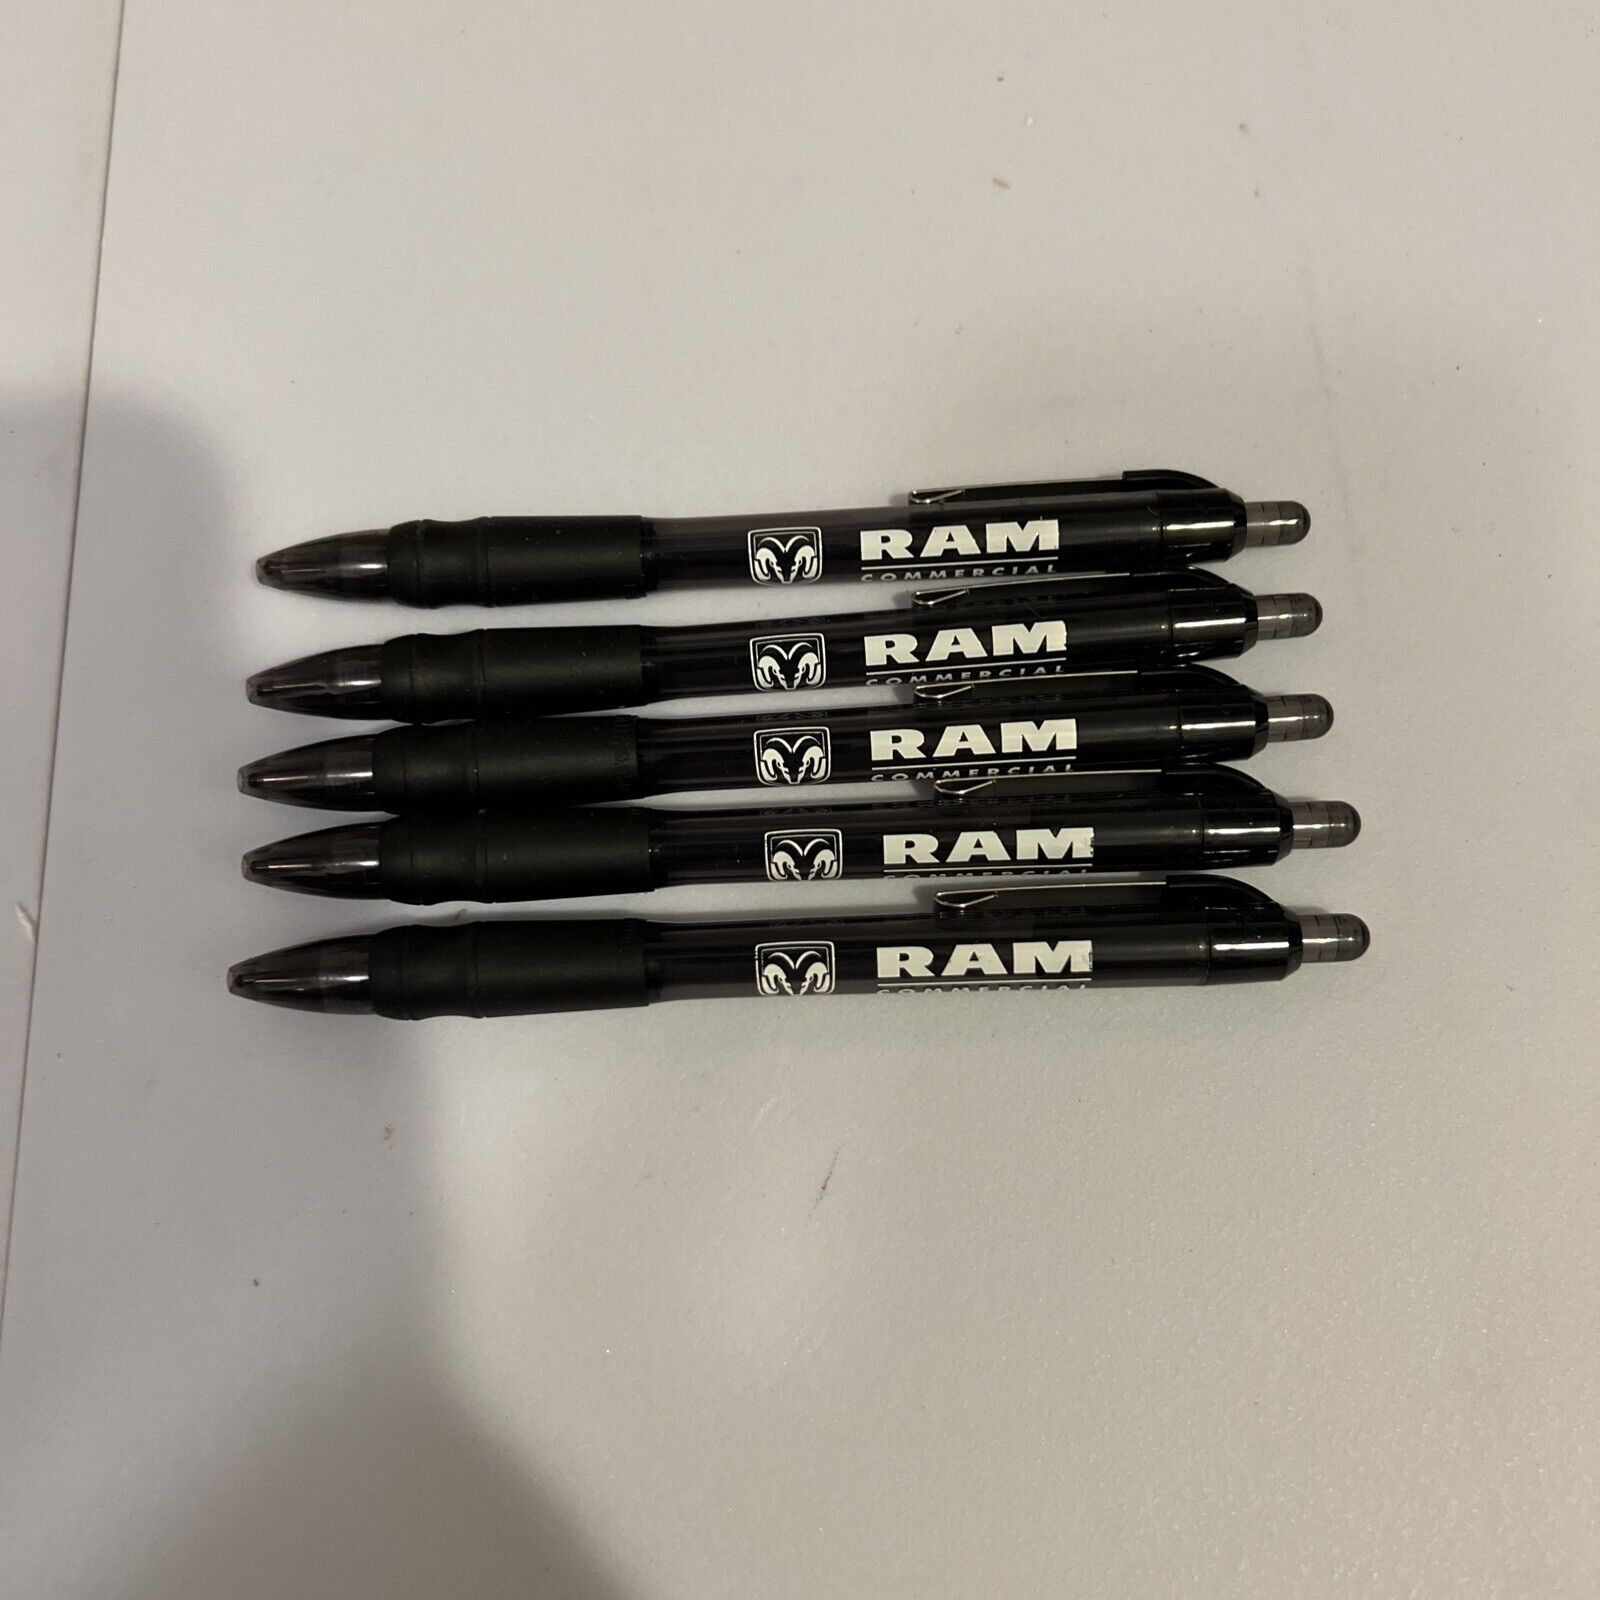 DODGE RAM Commercial Lot Of 5 BALL POINT PENS Retractable Black Ink